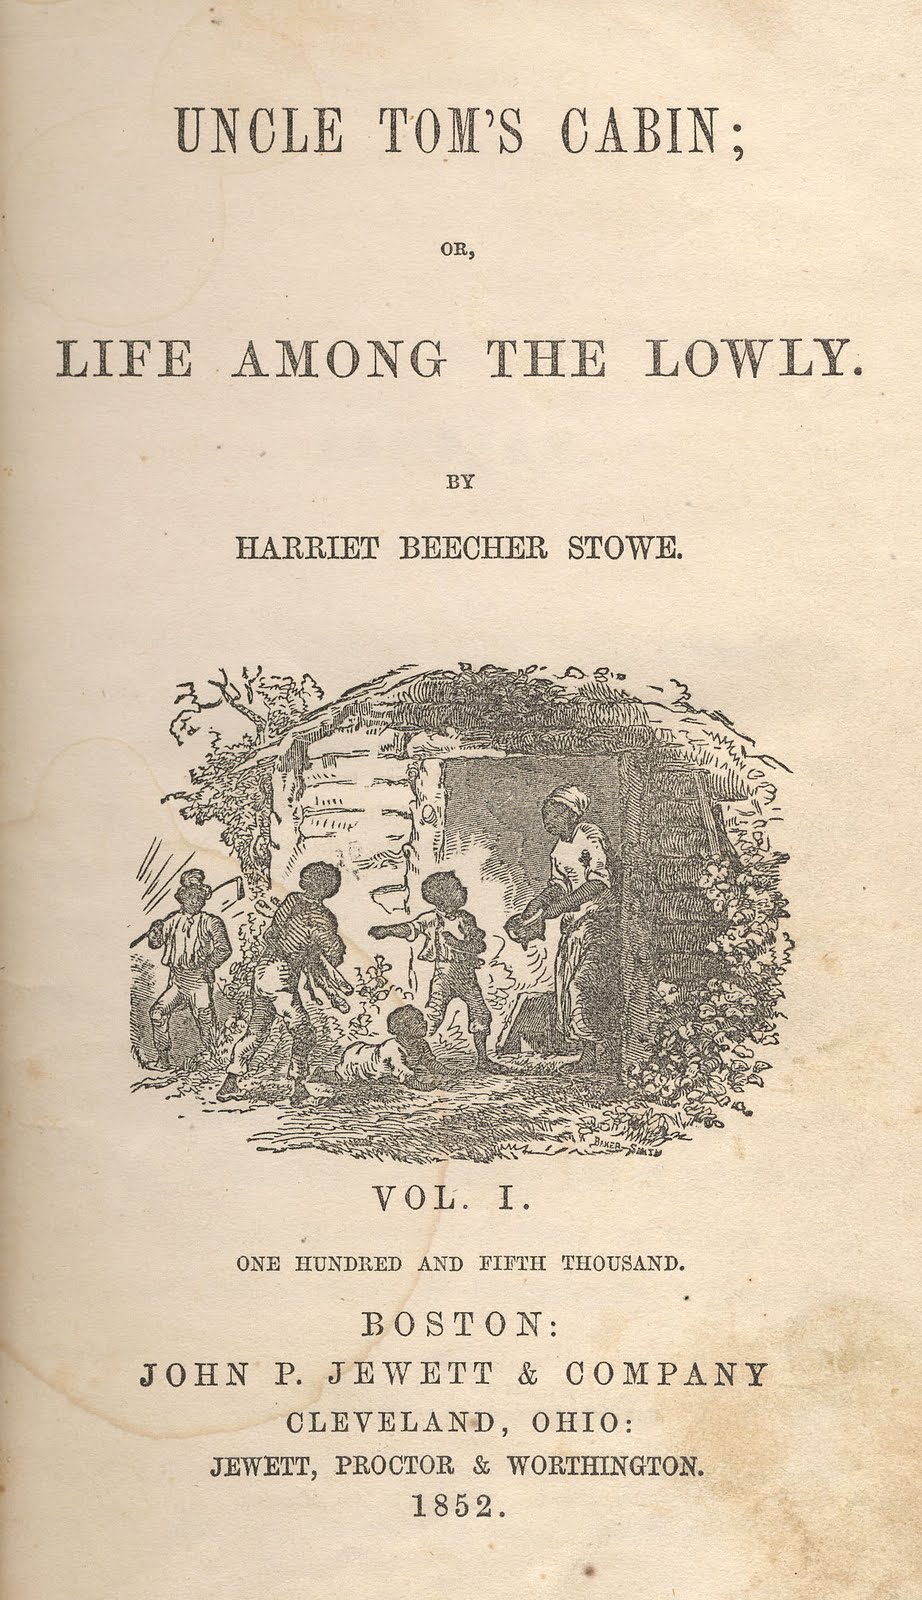 A fight against slavery in uncle toms cabin by harriet beecher stowe